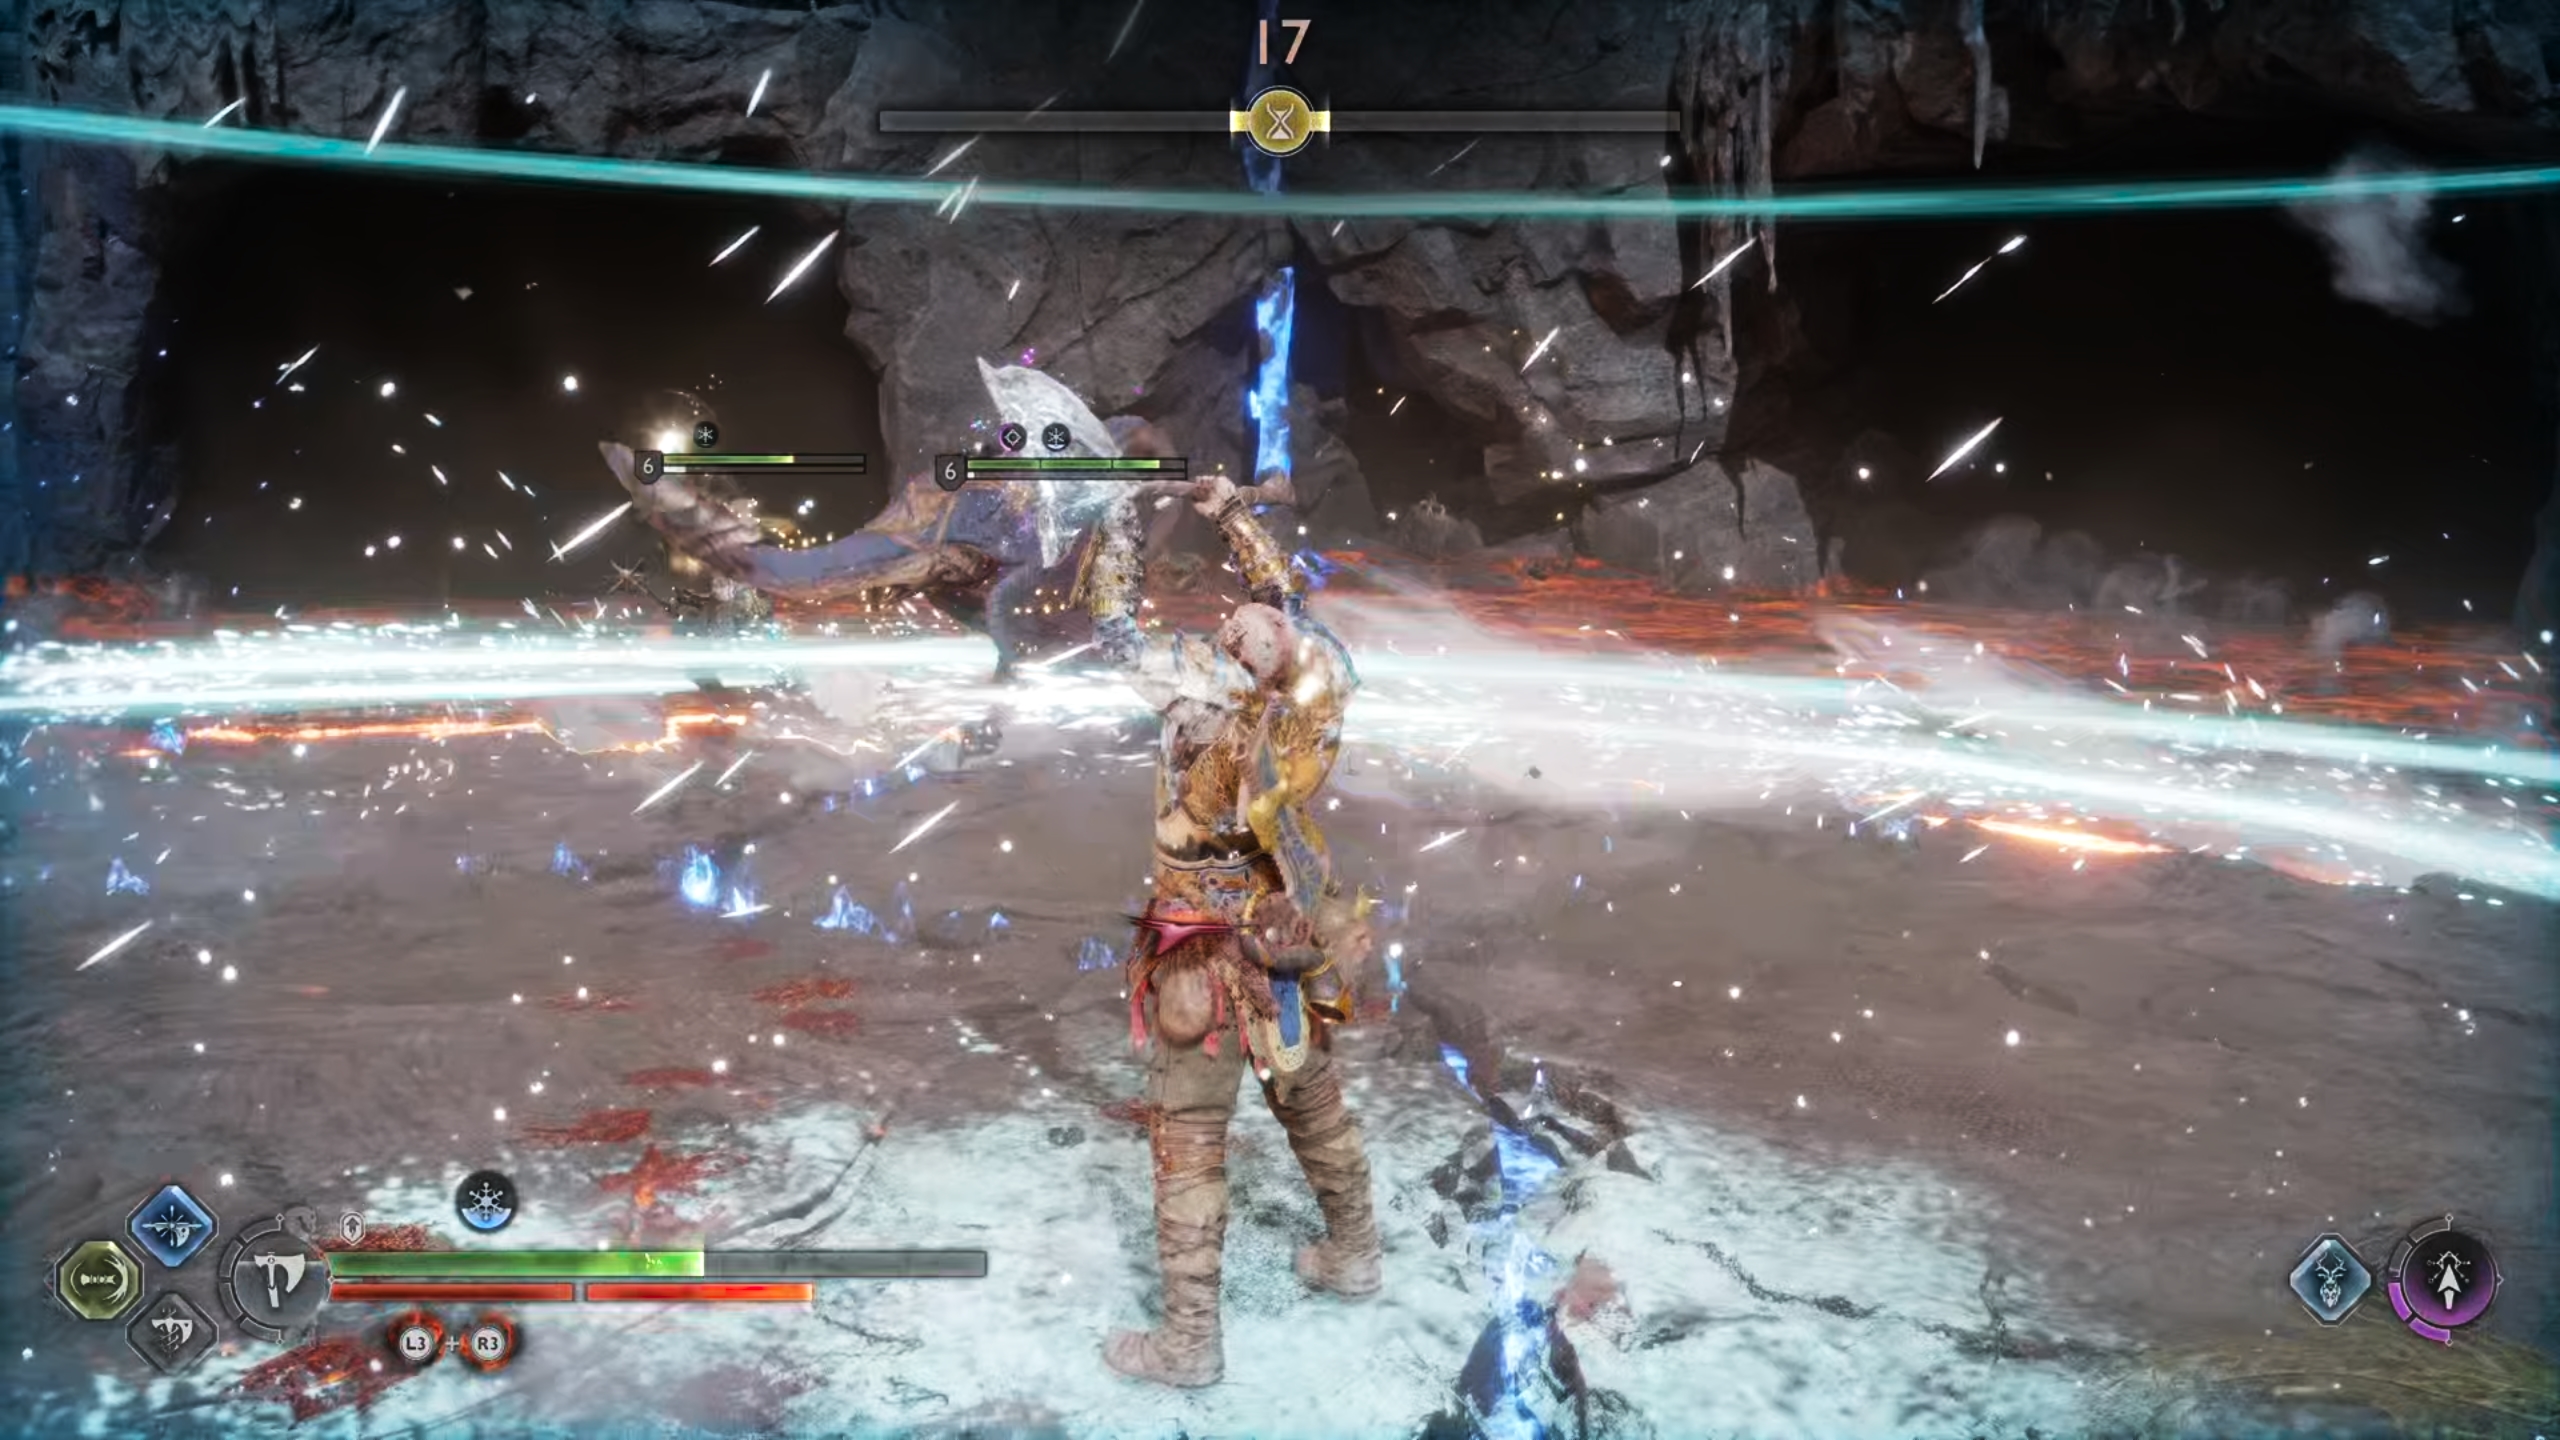 You can use AoE abilities such as Breath of Thamur to handle multiple enemies towards the end.